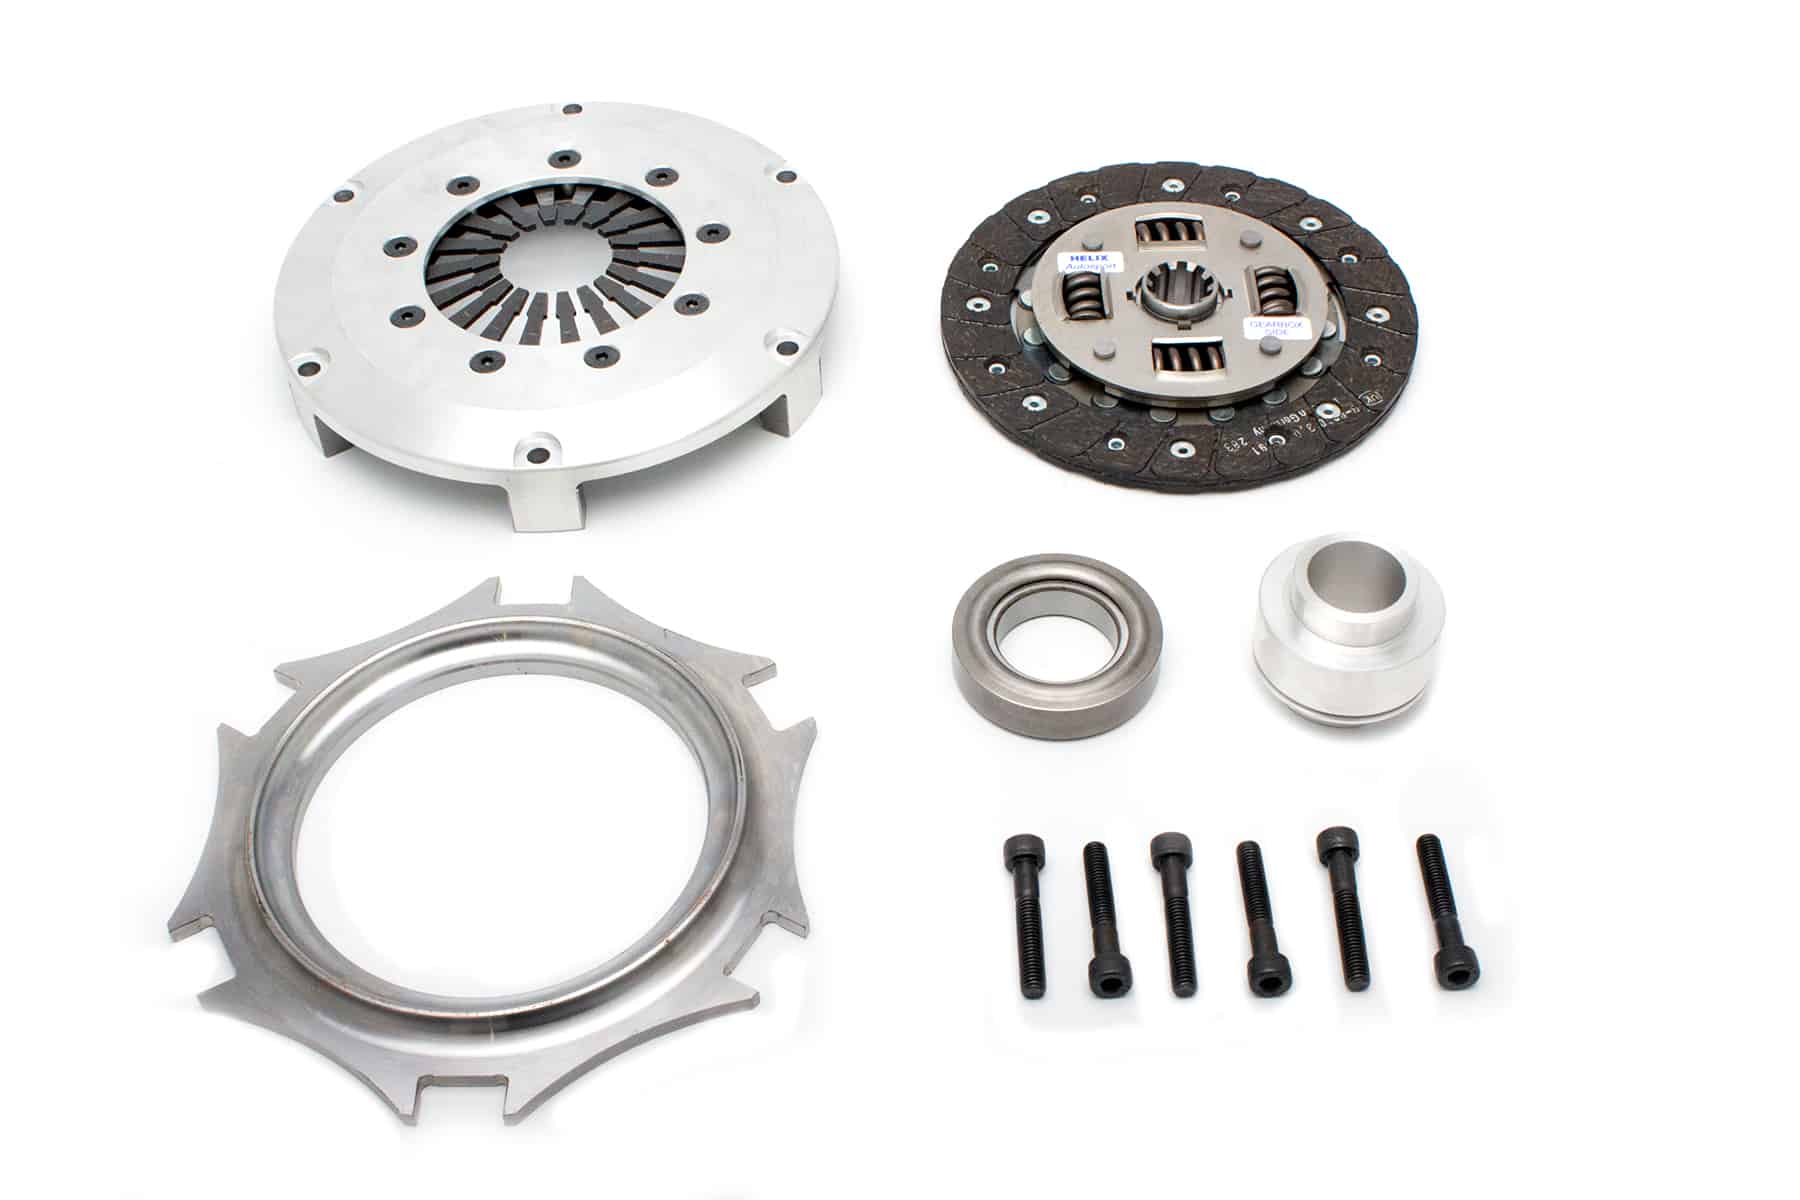 Fast Road / Rally Clutch (Kit)